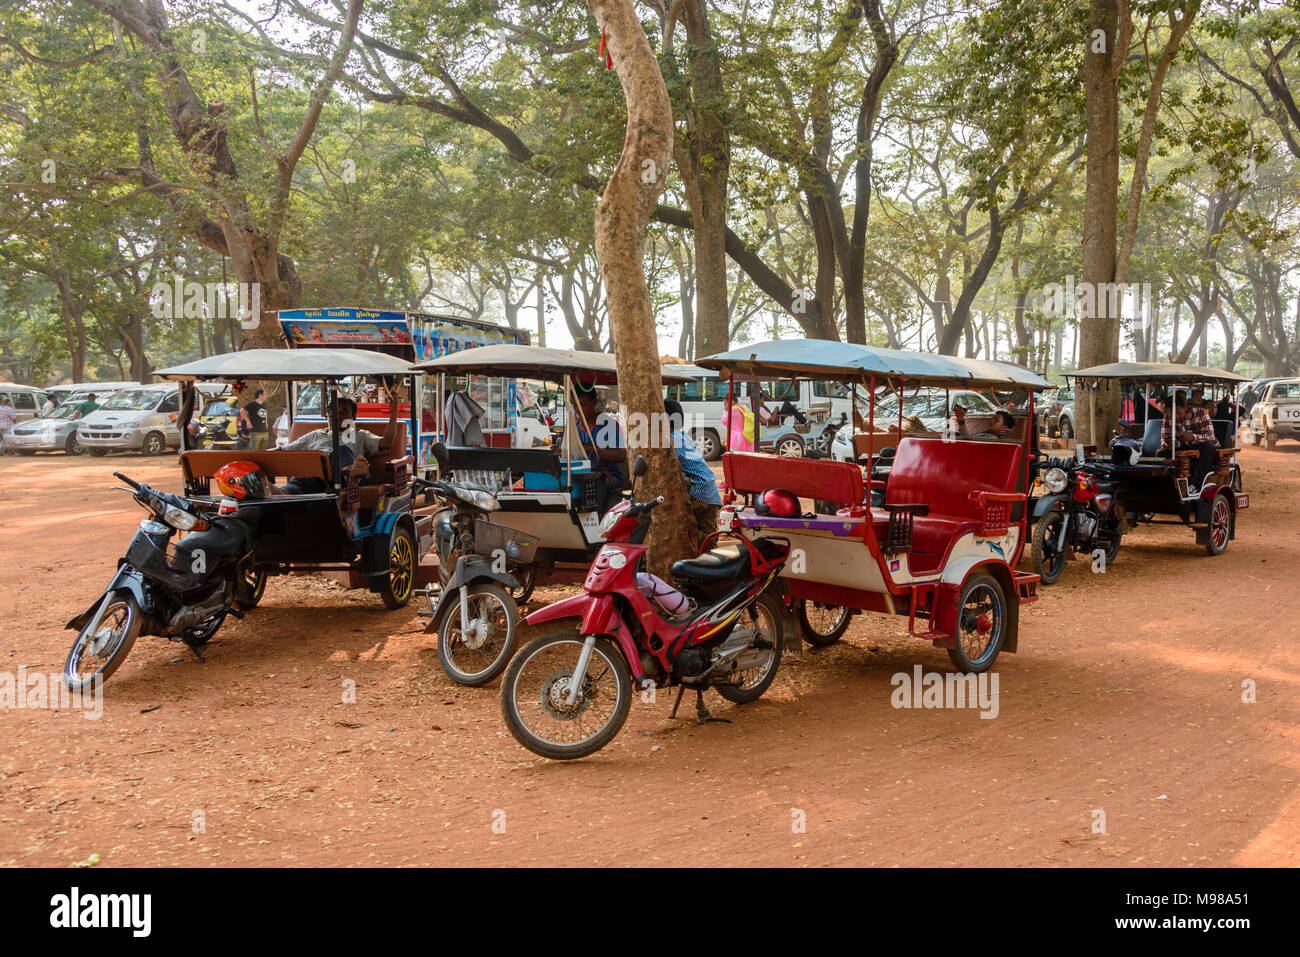 Drivers wait with their parked tuk-tuks (motorcycles with a trailer used as a taxi) in Cambodia. Stock Photo